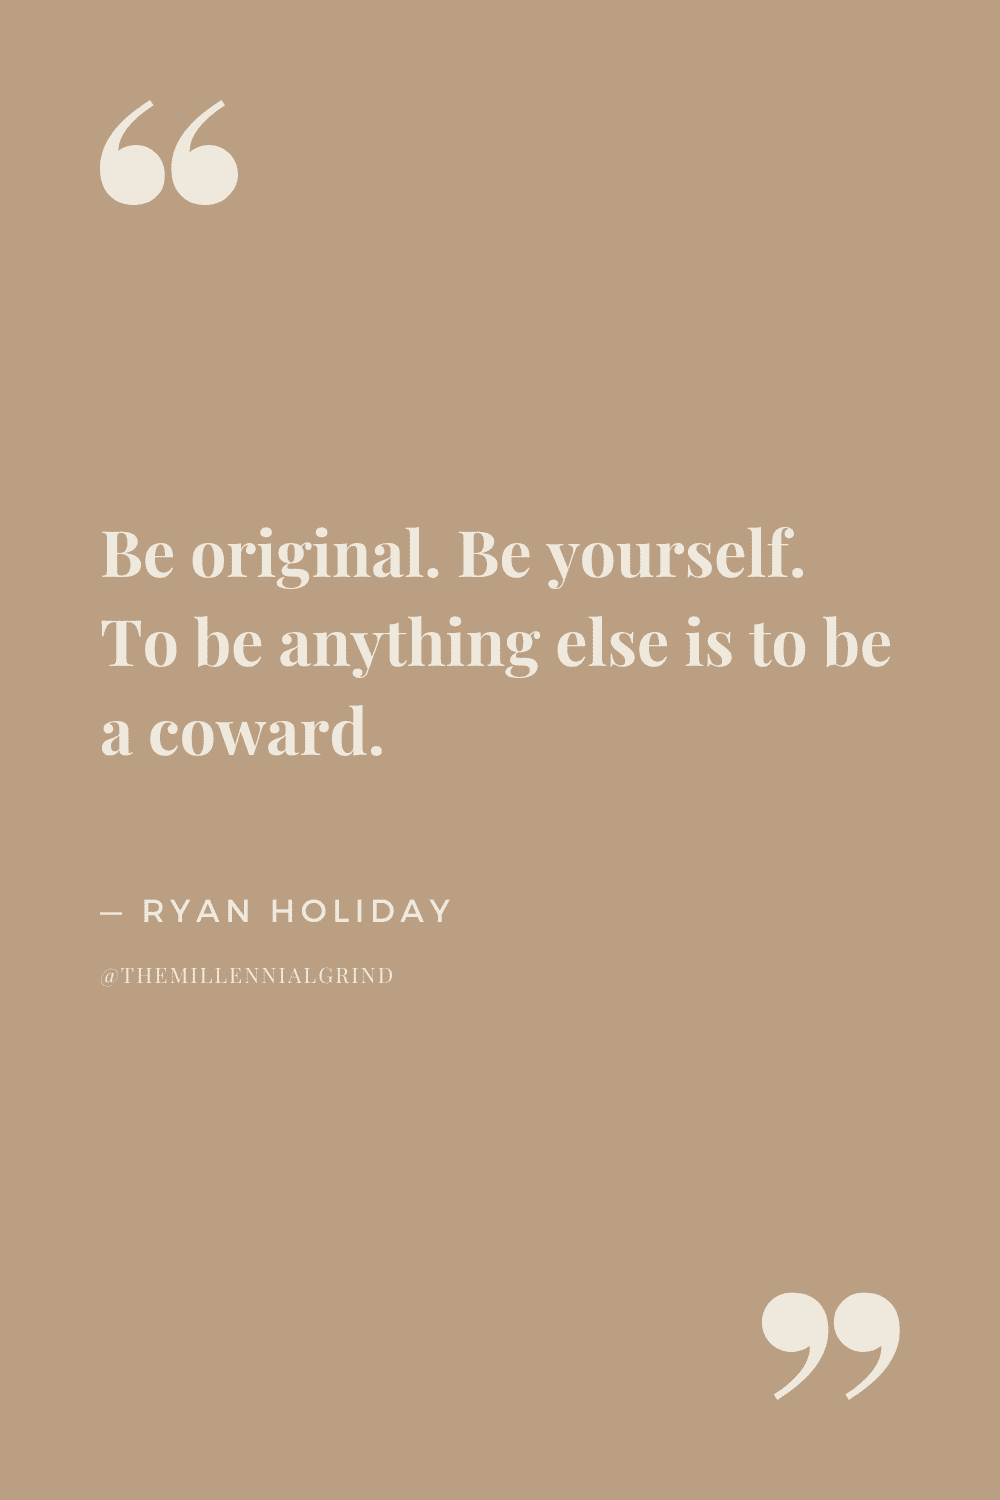 Quotes from Courage Is Calling by Ryan Holiday